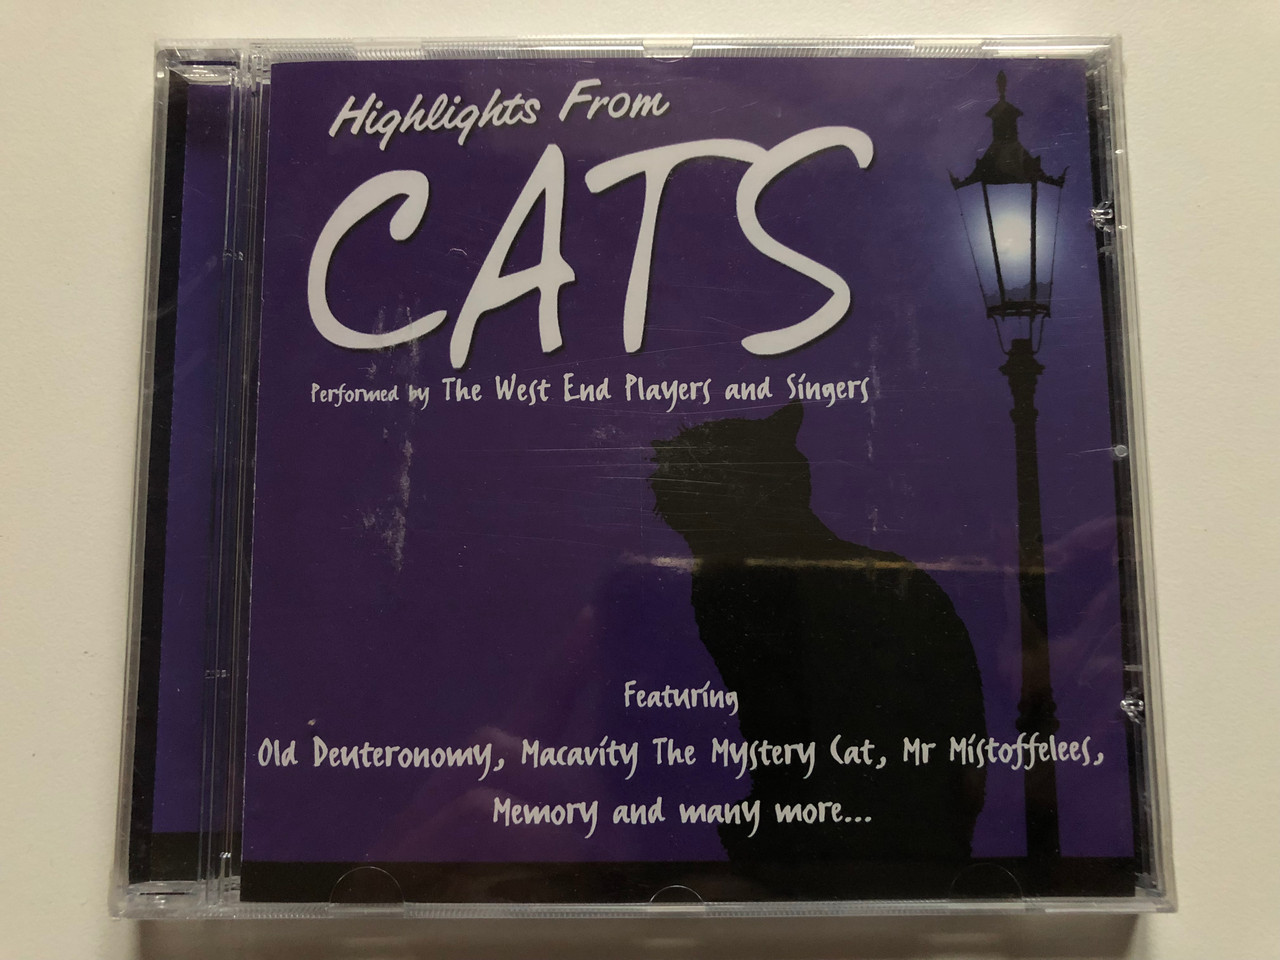 https://cdn10.bigcommerce.com/s-62bdpkt7pb/products/0/images/235028/Highlights_From_Cats_-_Performed_by_The_West_End_Players_And_Singers_Featuring_Old_Deutoronomy_Macavity_The_Mystery_Cat_Mr._Mistoffelees_Memory_and_many_more..._Bellevue_Audio_CD_2000_1_1__50832.1655736025.1280.1280.JPG?c=2&_gl=1*abky40*_ga*MjA2NTIxMjE2MC4xNTkwNTEyNTMy*_ga_WS2VZYPC6G*MTY1NTczNTgxMy40NDQuMS4xNjU1NzM2MDE1LjYw